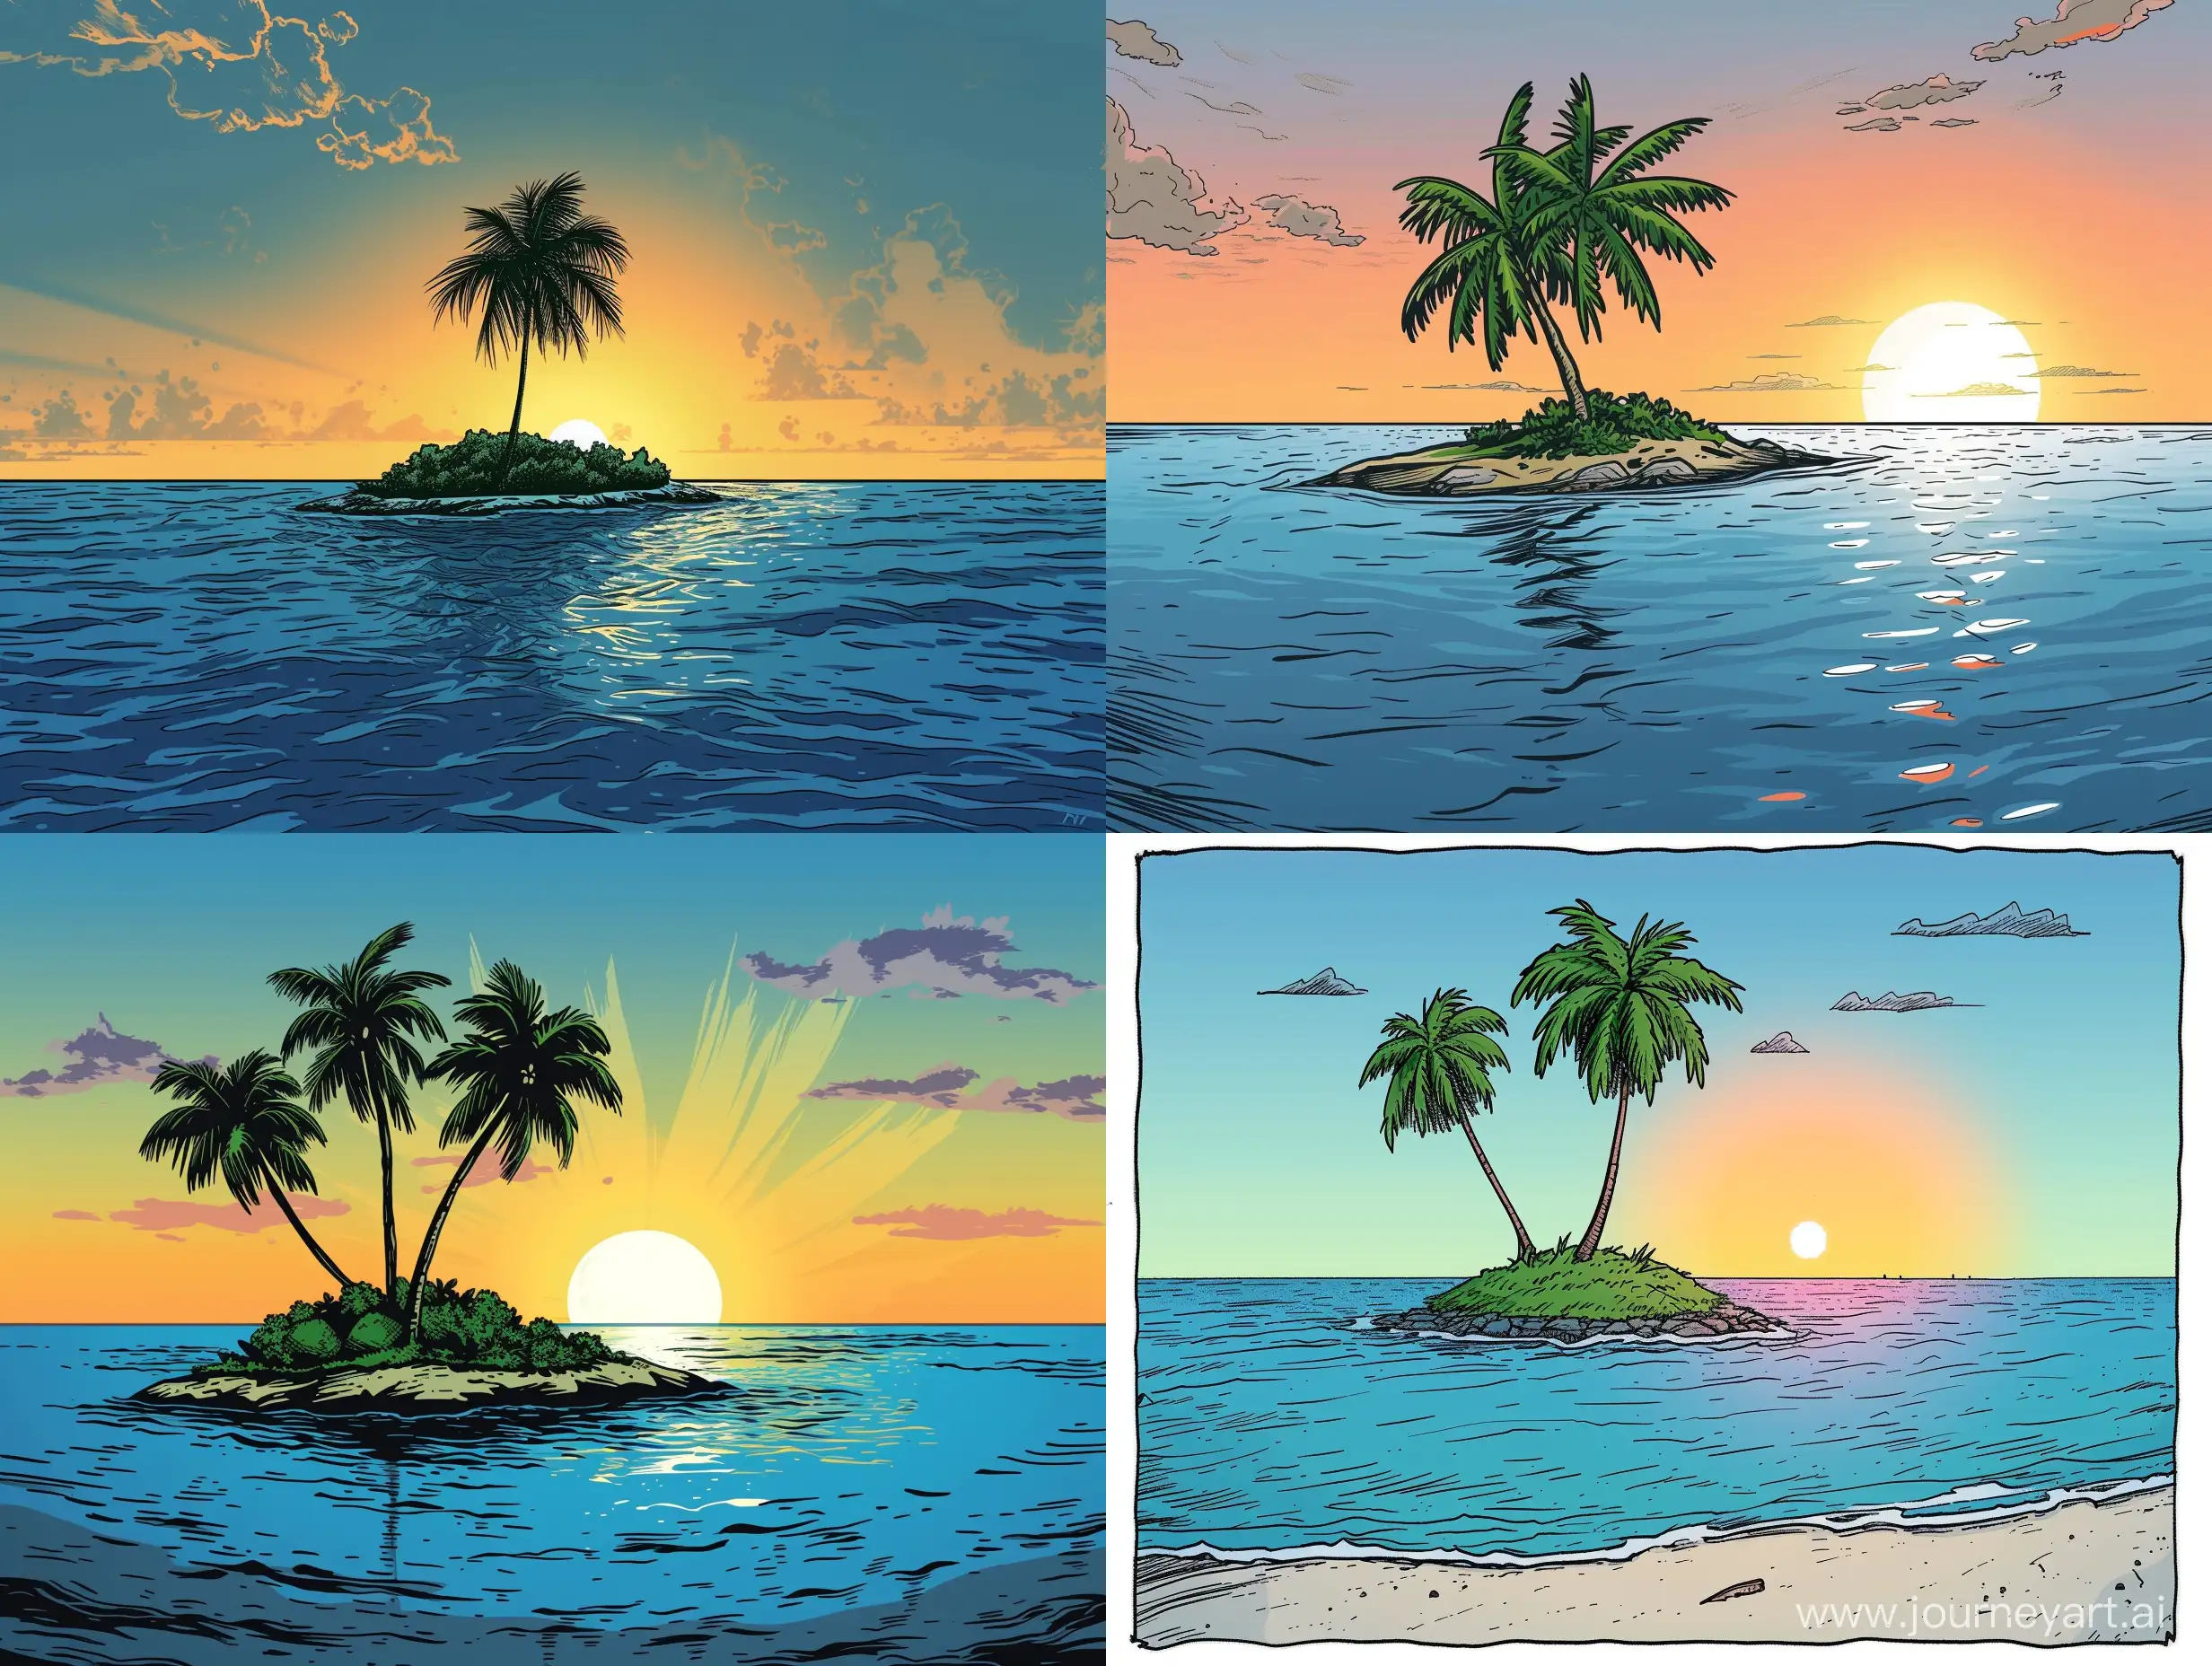 Tropical-Sunrise-on-a-Secluded-Island-Comic-Book-Style-Scene-with-Coconut-Palms